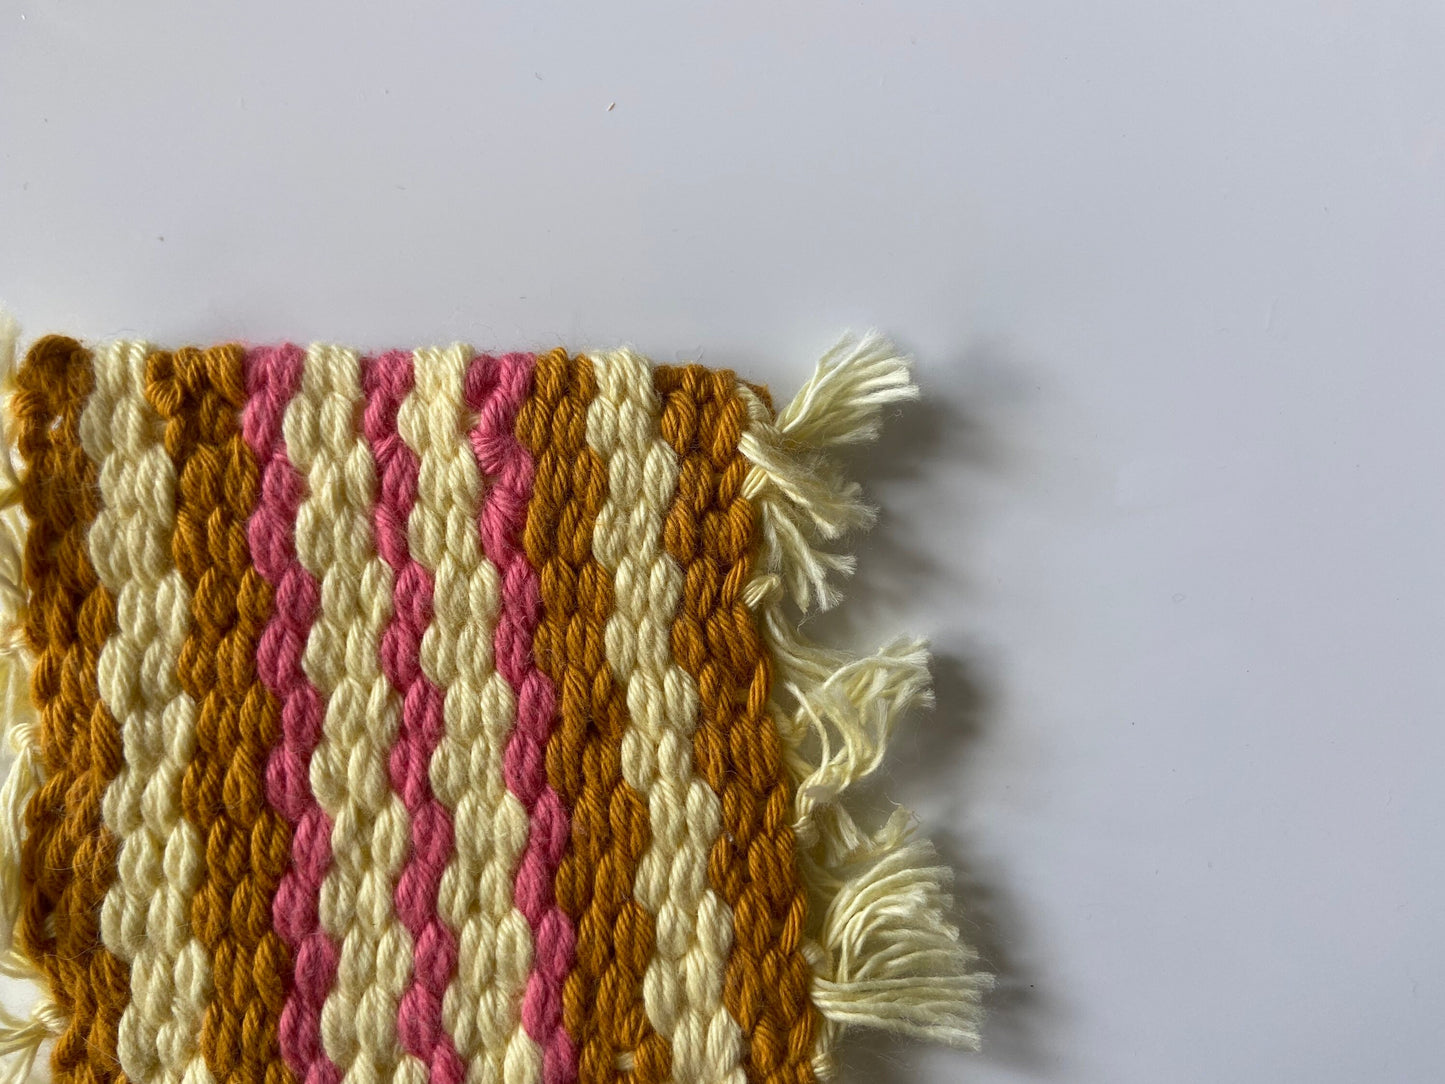 Pink, Soft Yellow, and Mustard Yellow Handwoven Coaster